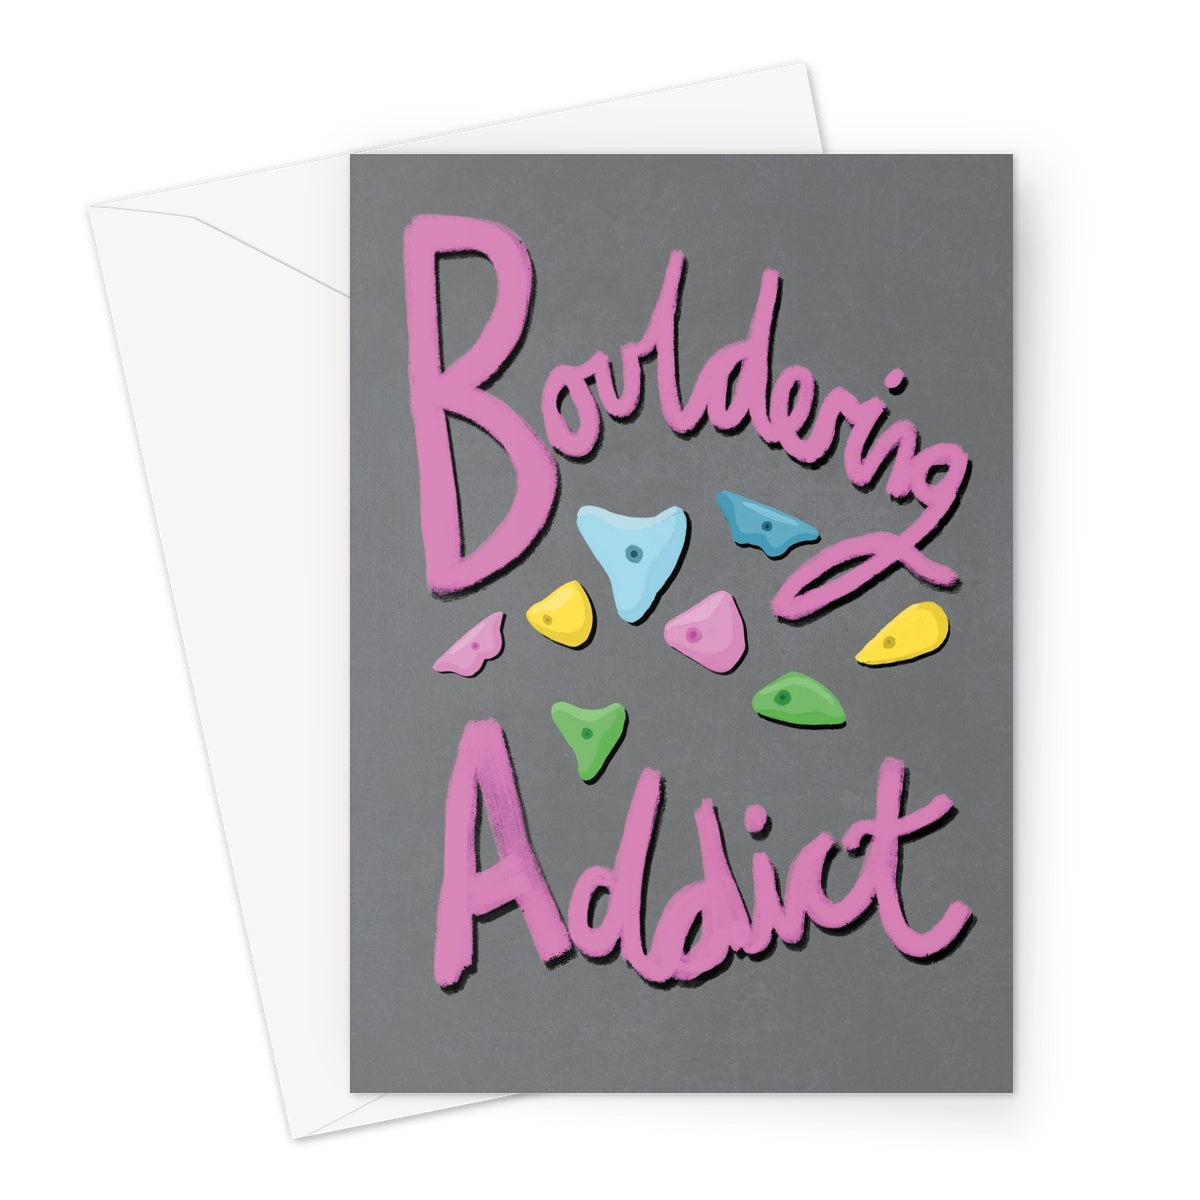 Bouldering Addict - Light Grey and Pink Greeting Card